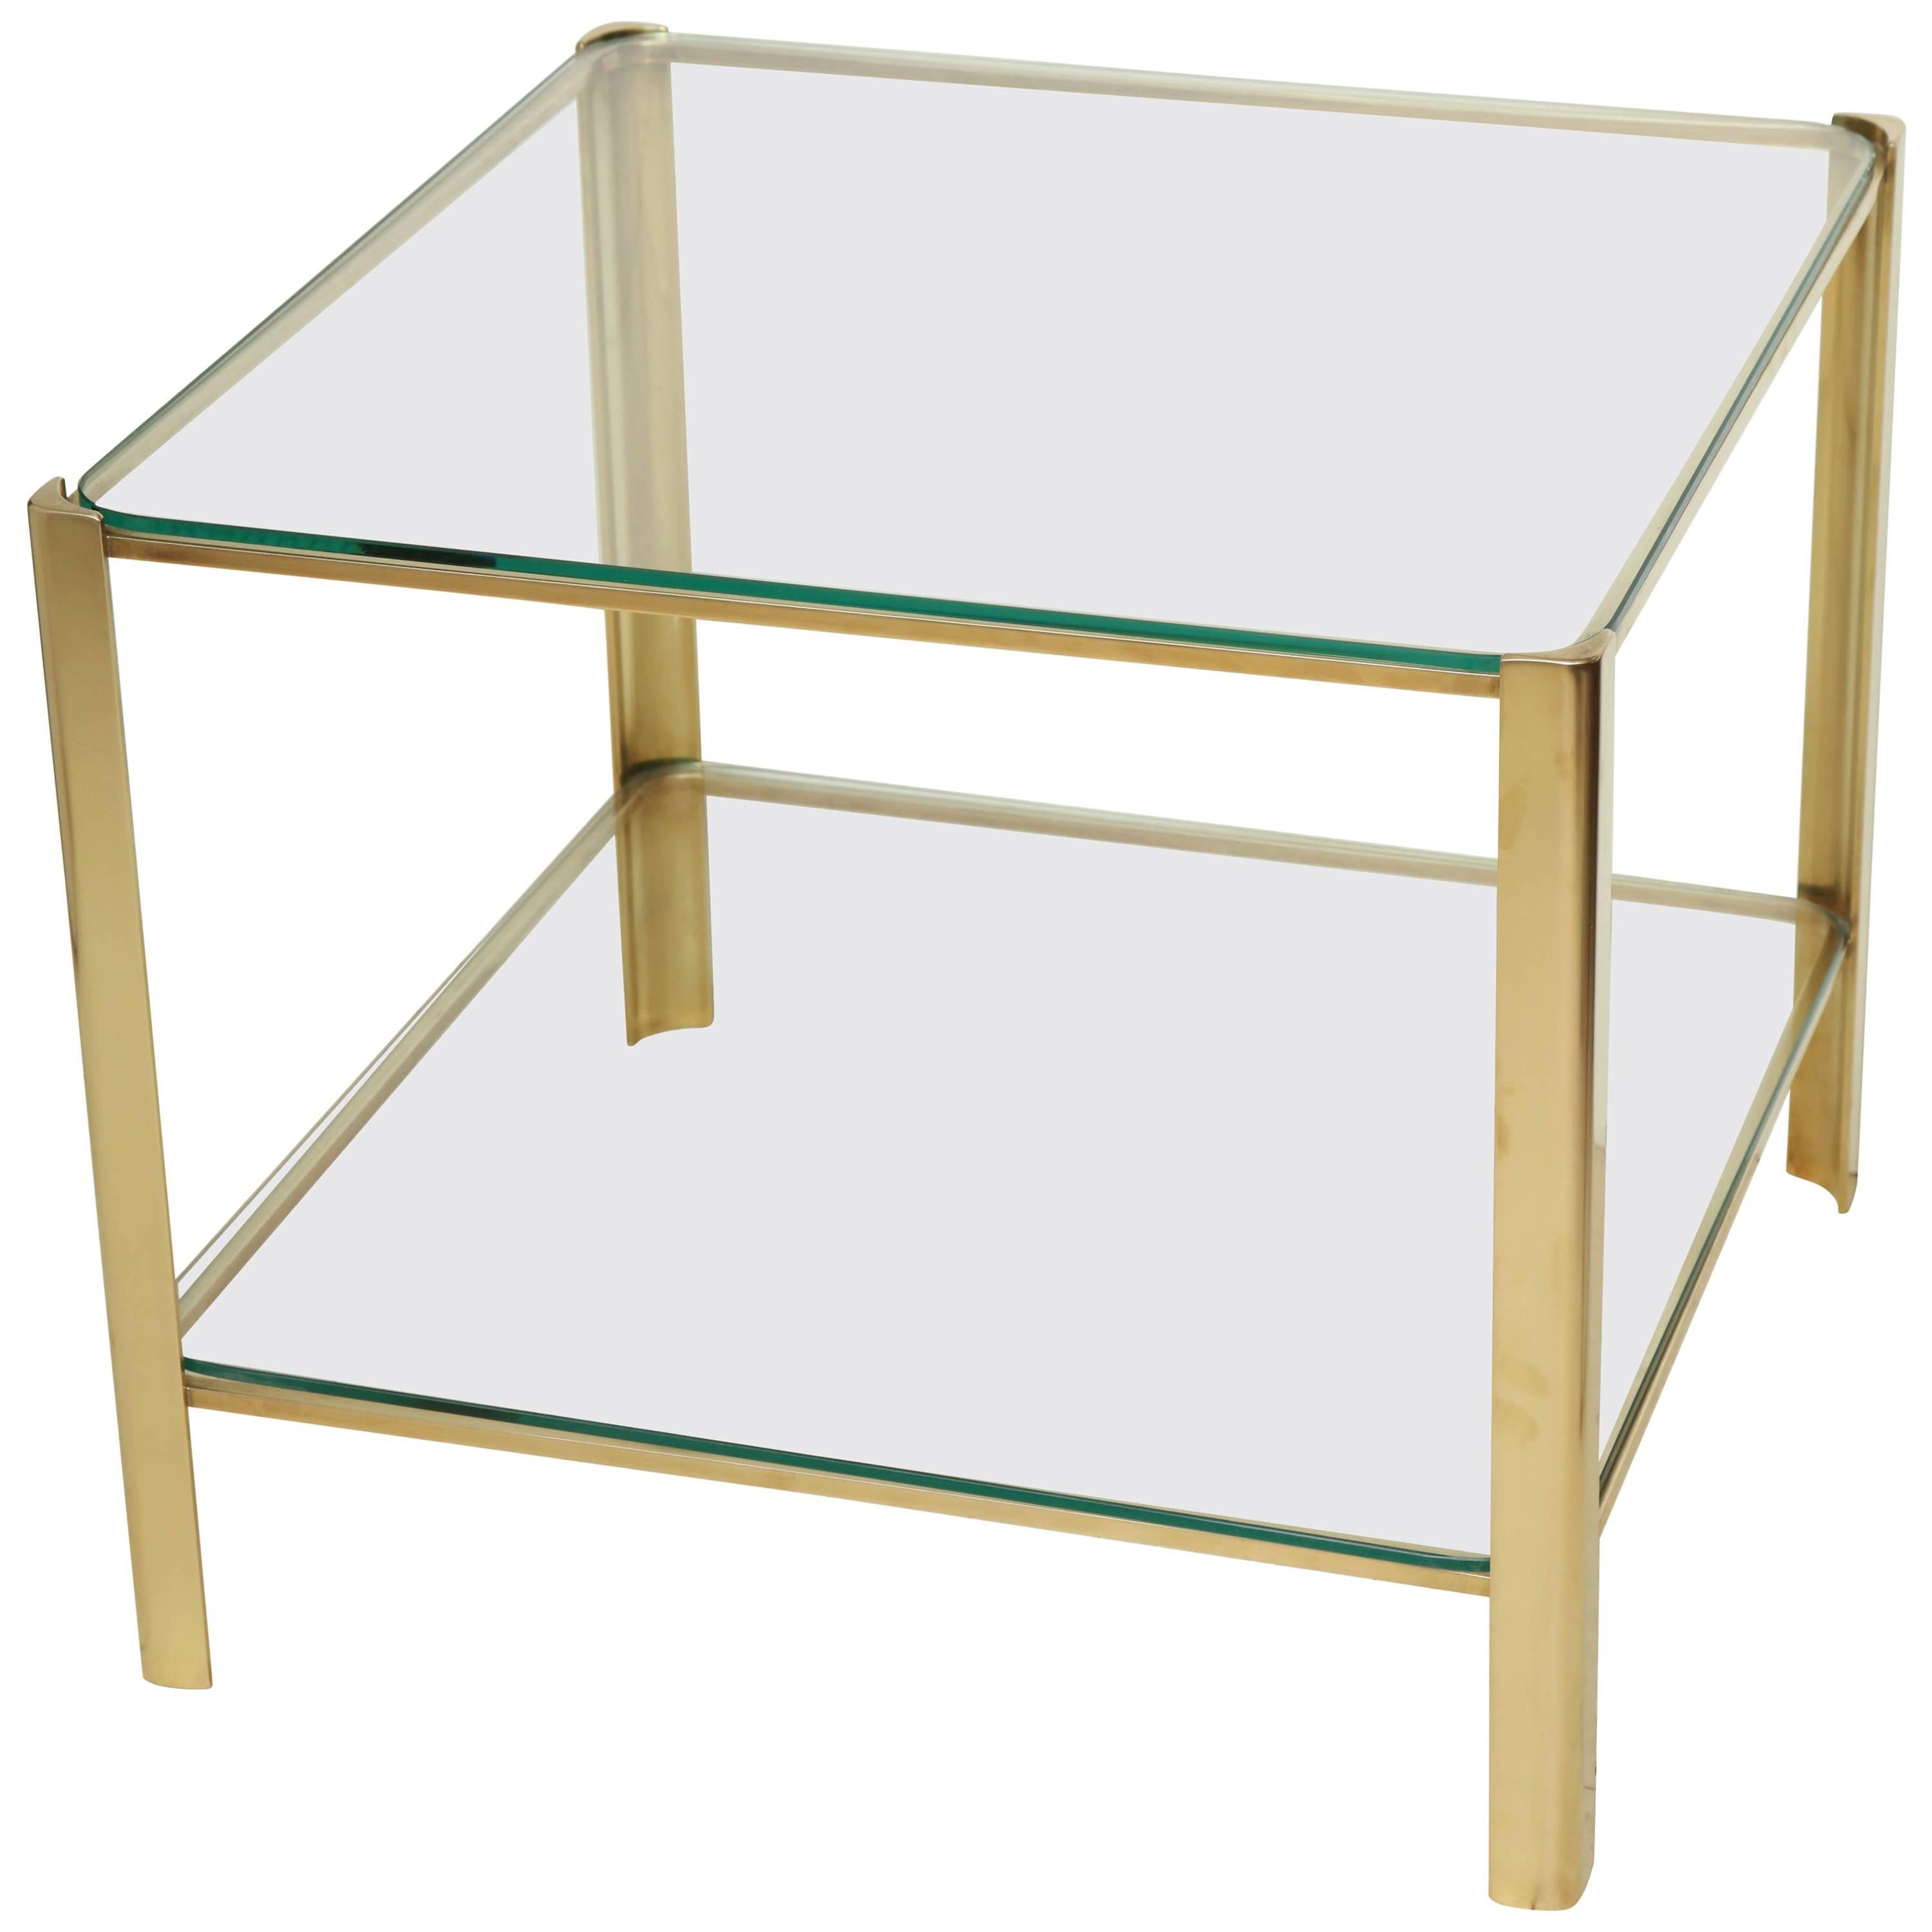 Square Midcentury Brass and Glass Side Table by Maison Malabert, circa 1960s For Sale